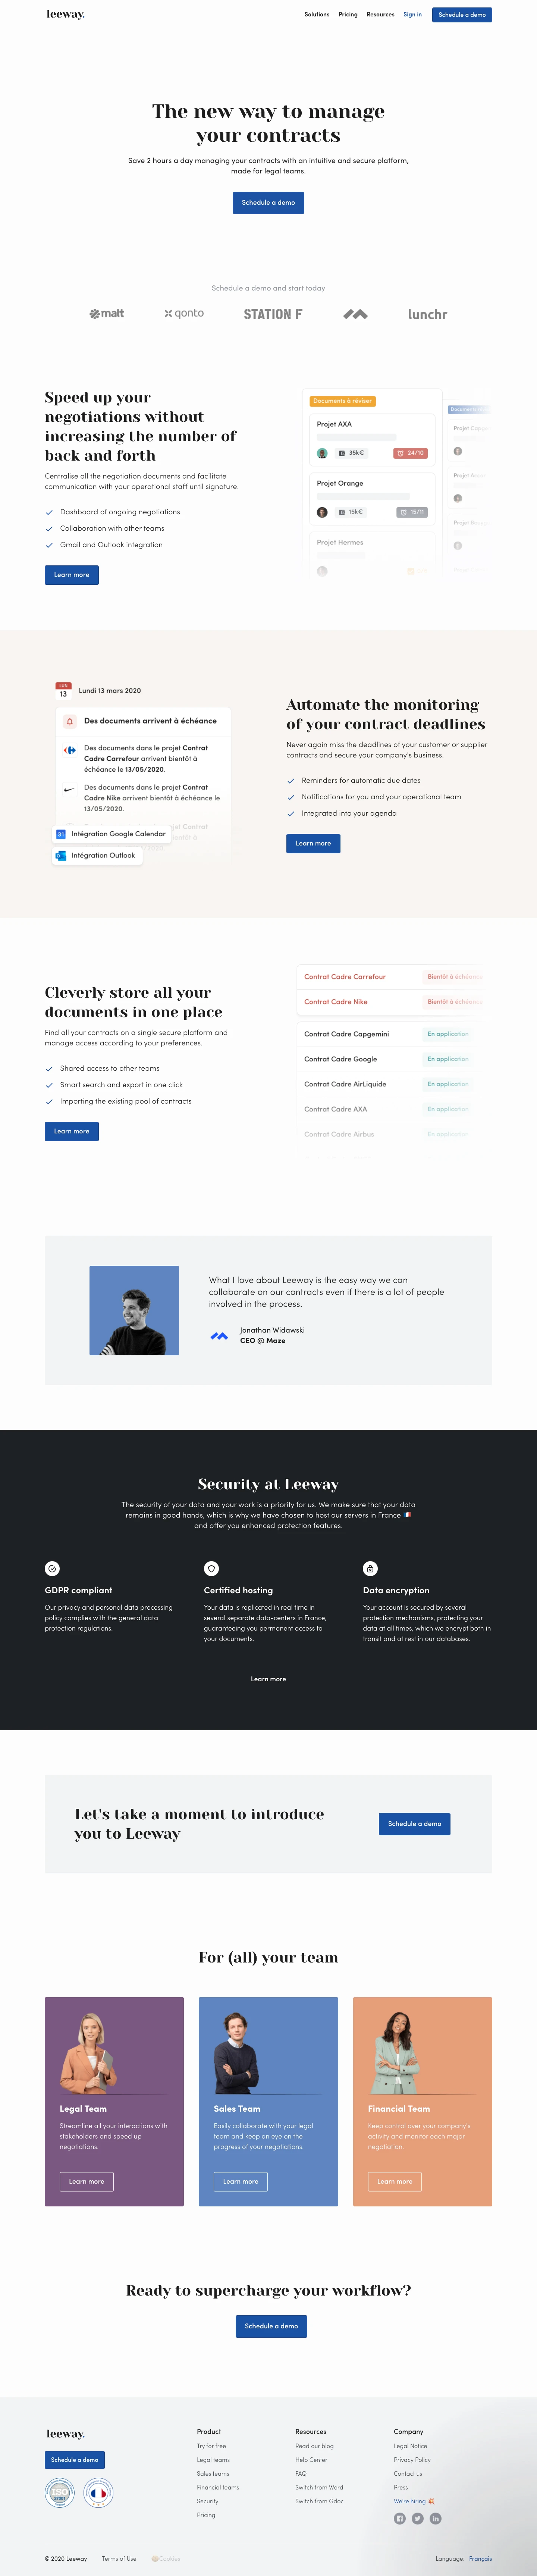 Leeway Landing Page Example: The new way to manage your contracts. Save 2 hours a day managing your contracts with an intuitive and secure platform, made for legal teams.